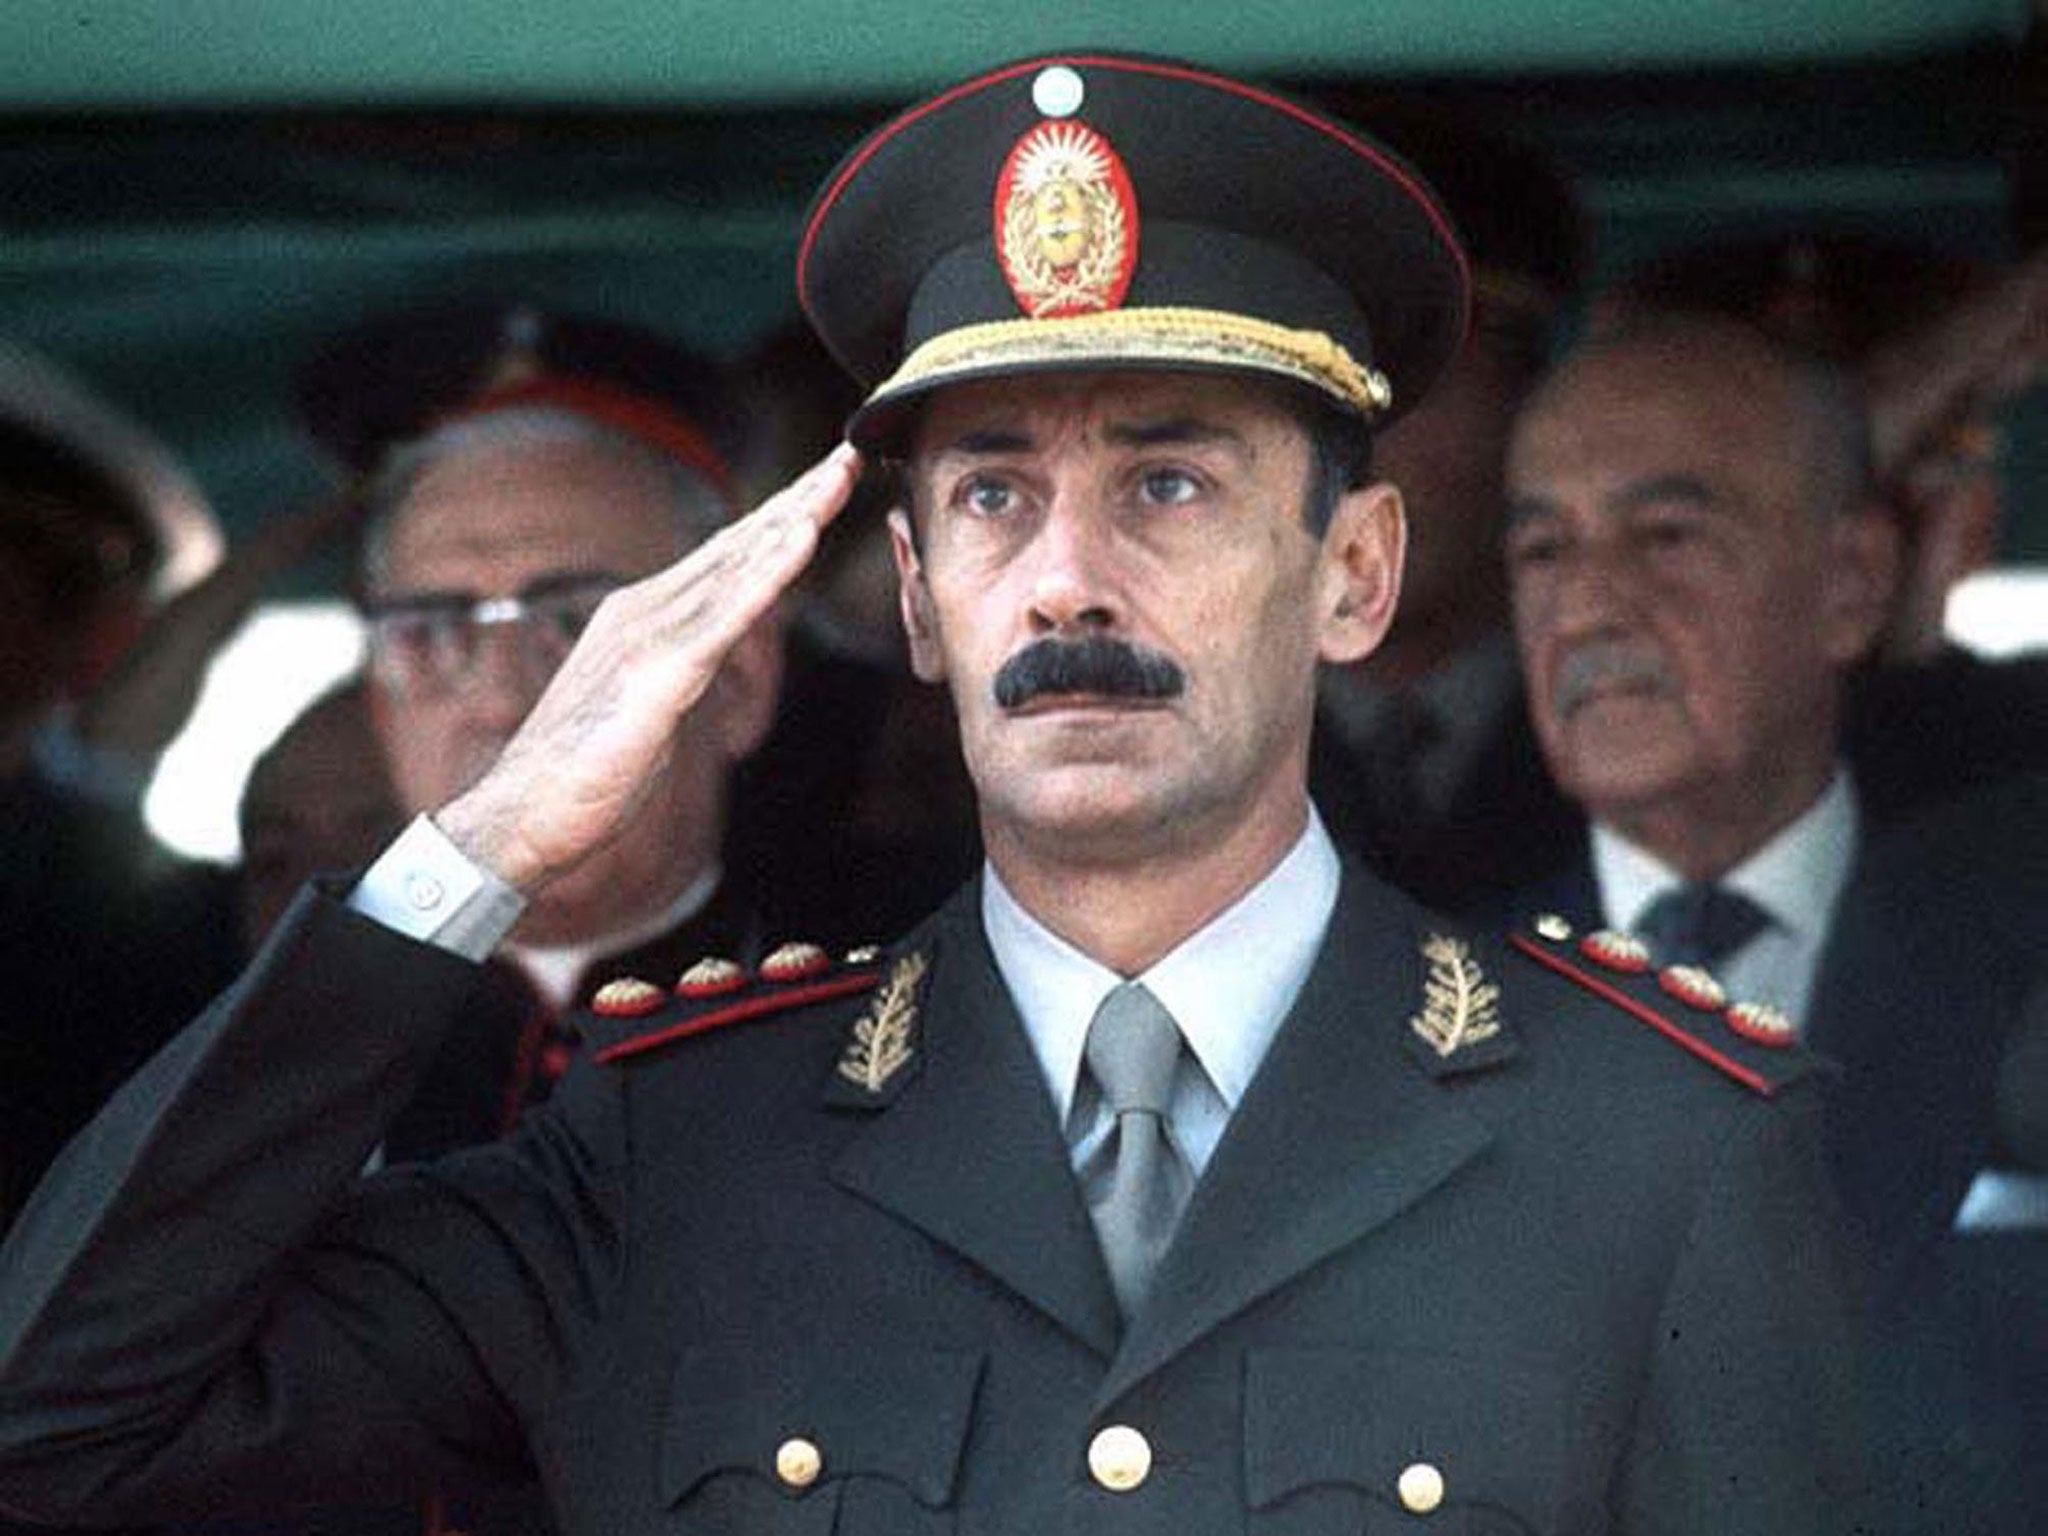 Videla in 1978: by then thousands of the 'disappeared' had been tortured and killed